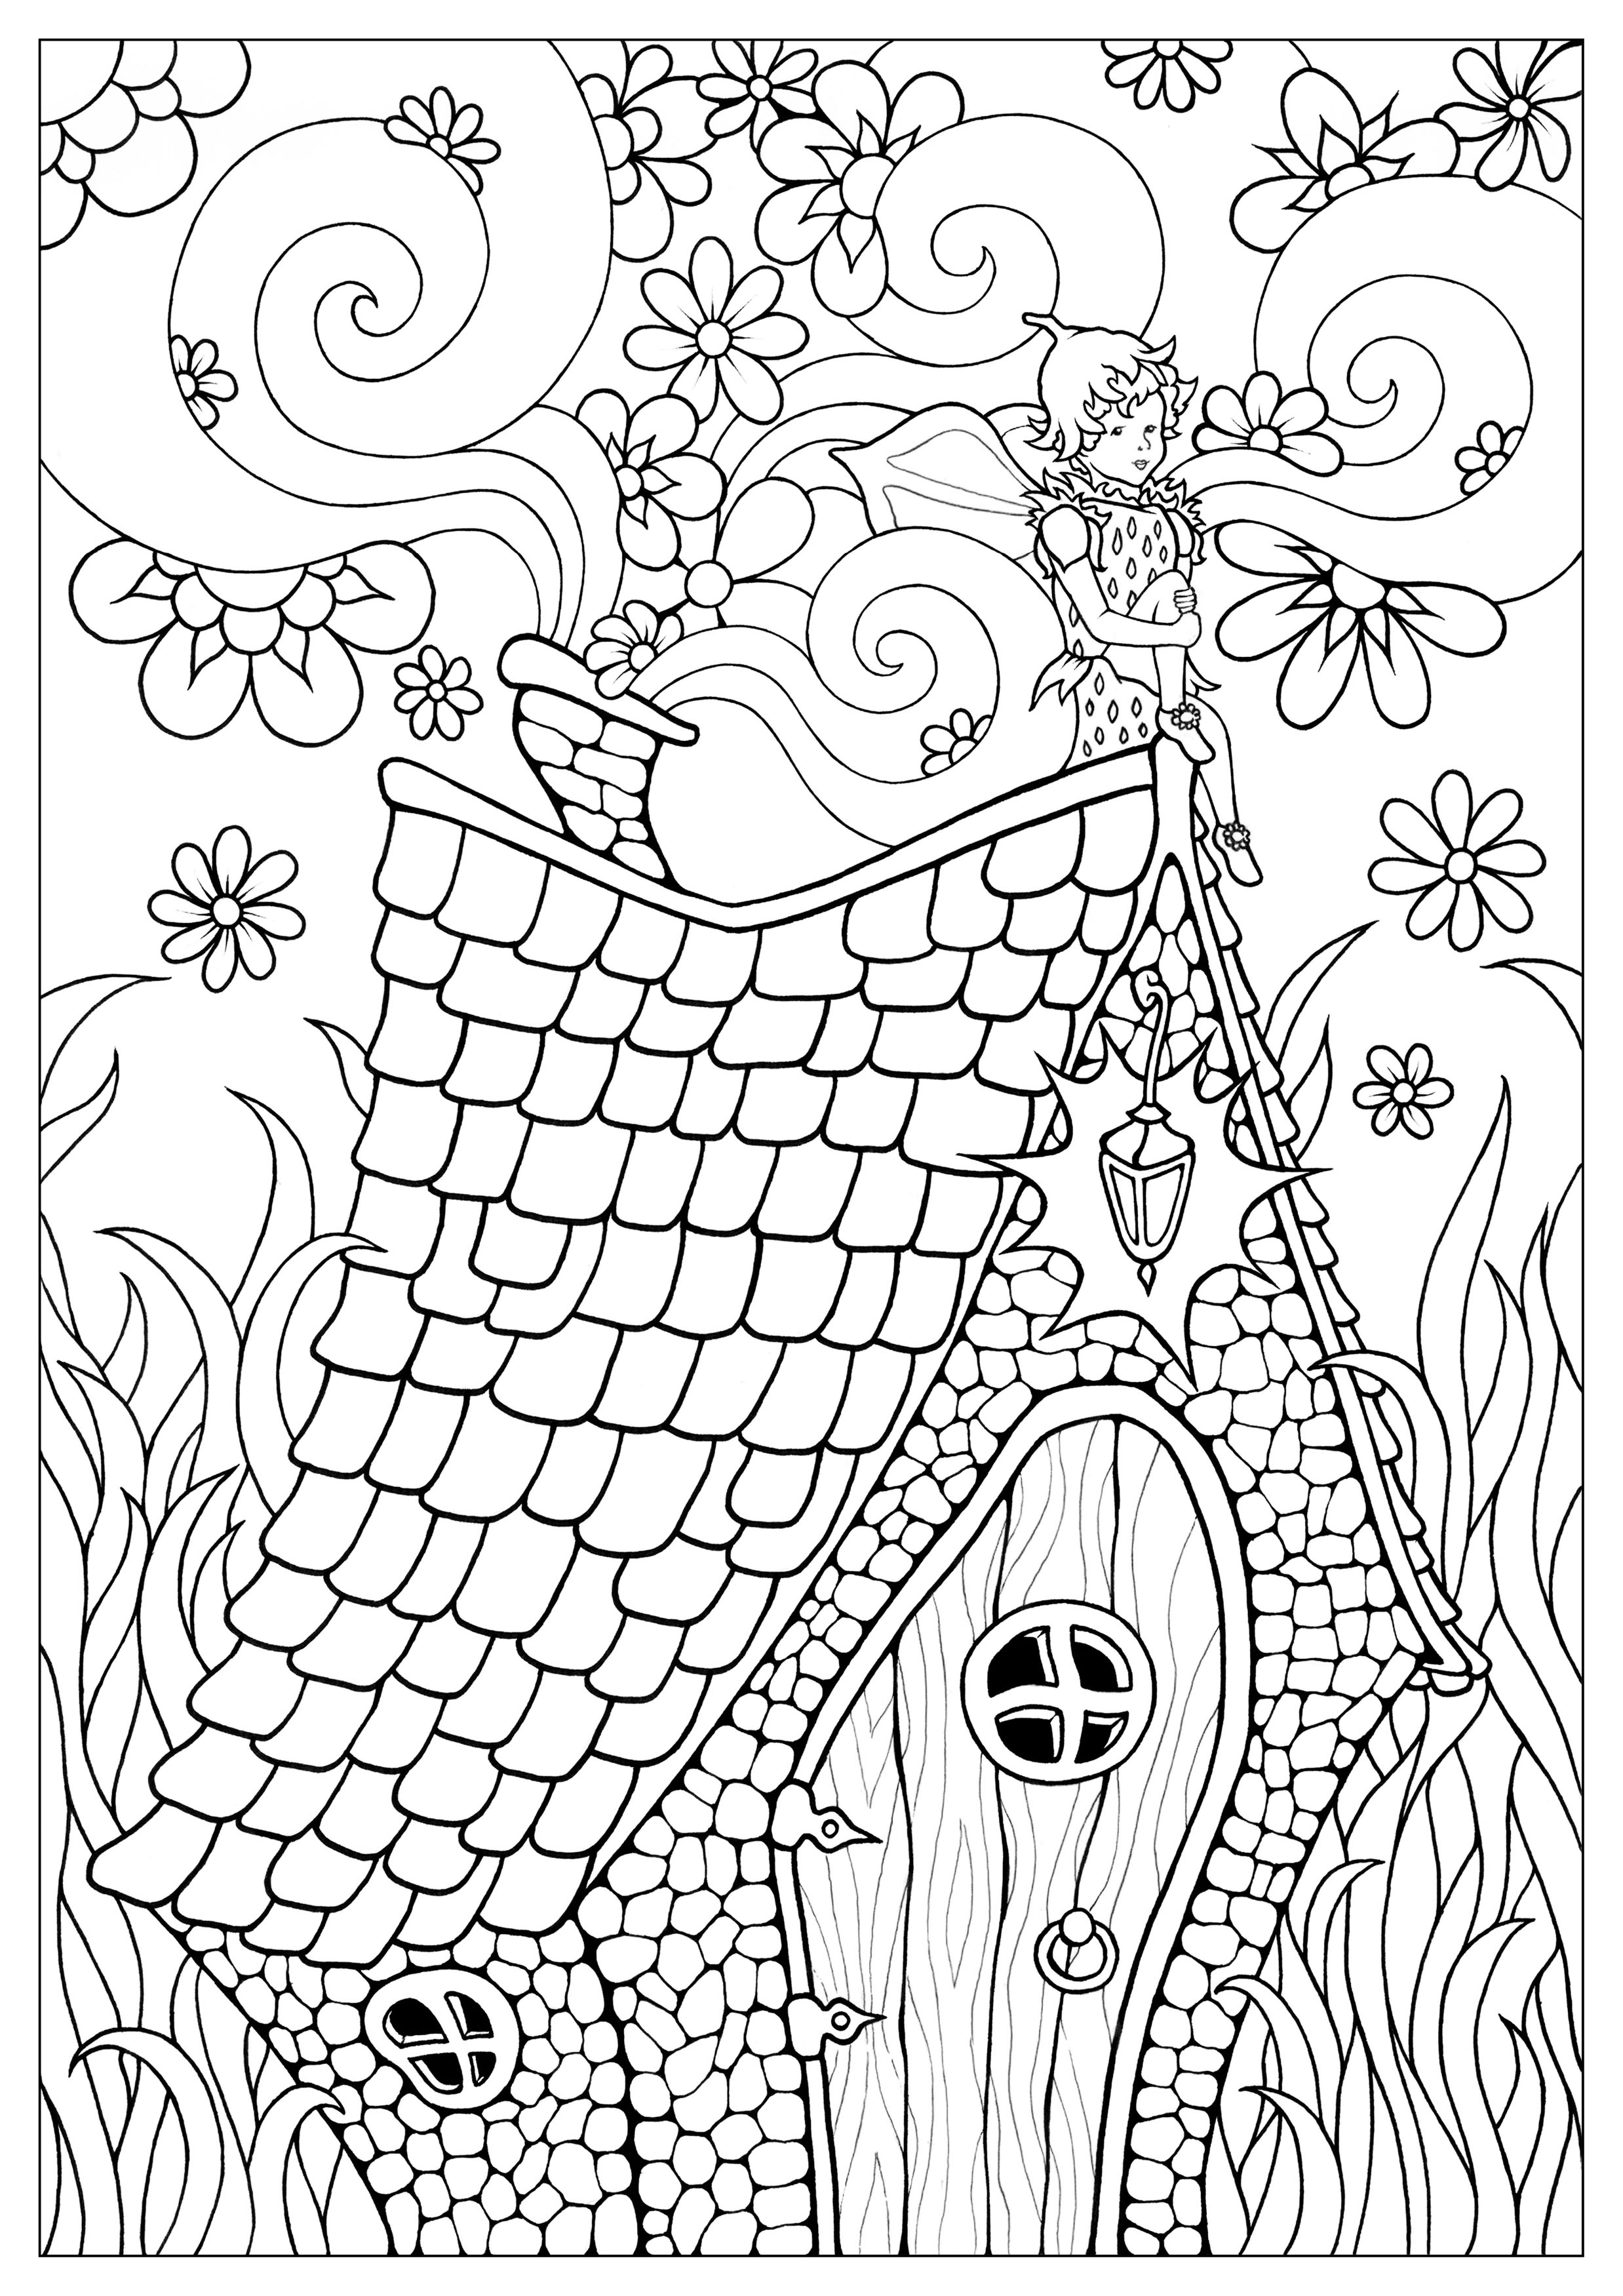 Fairy free to color for children - Fairy Kids Coloring Pages